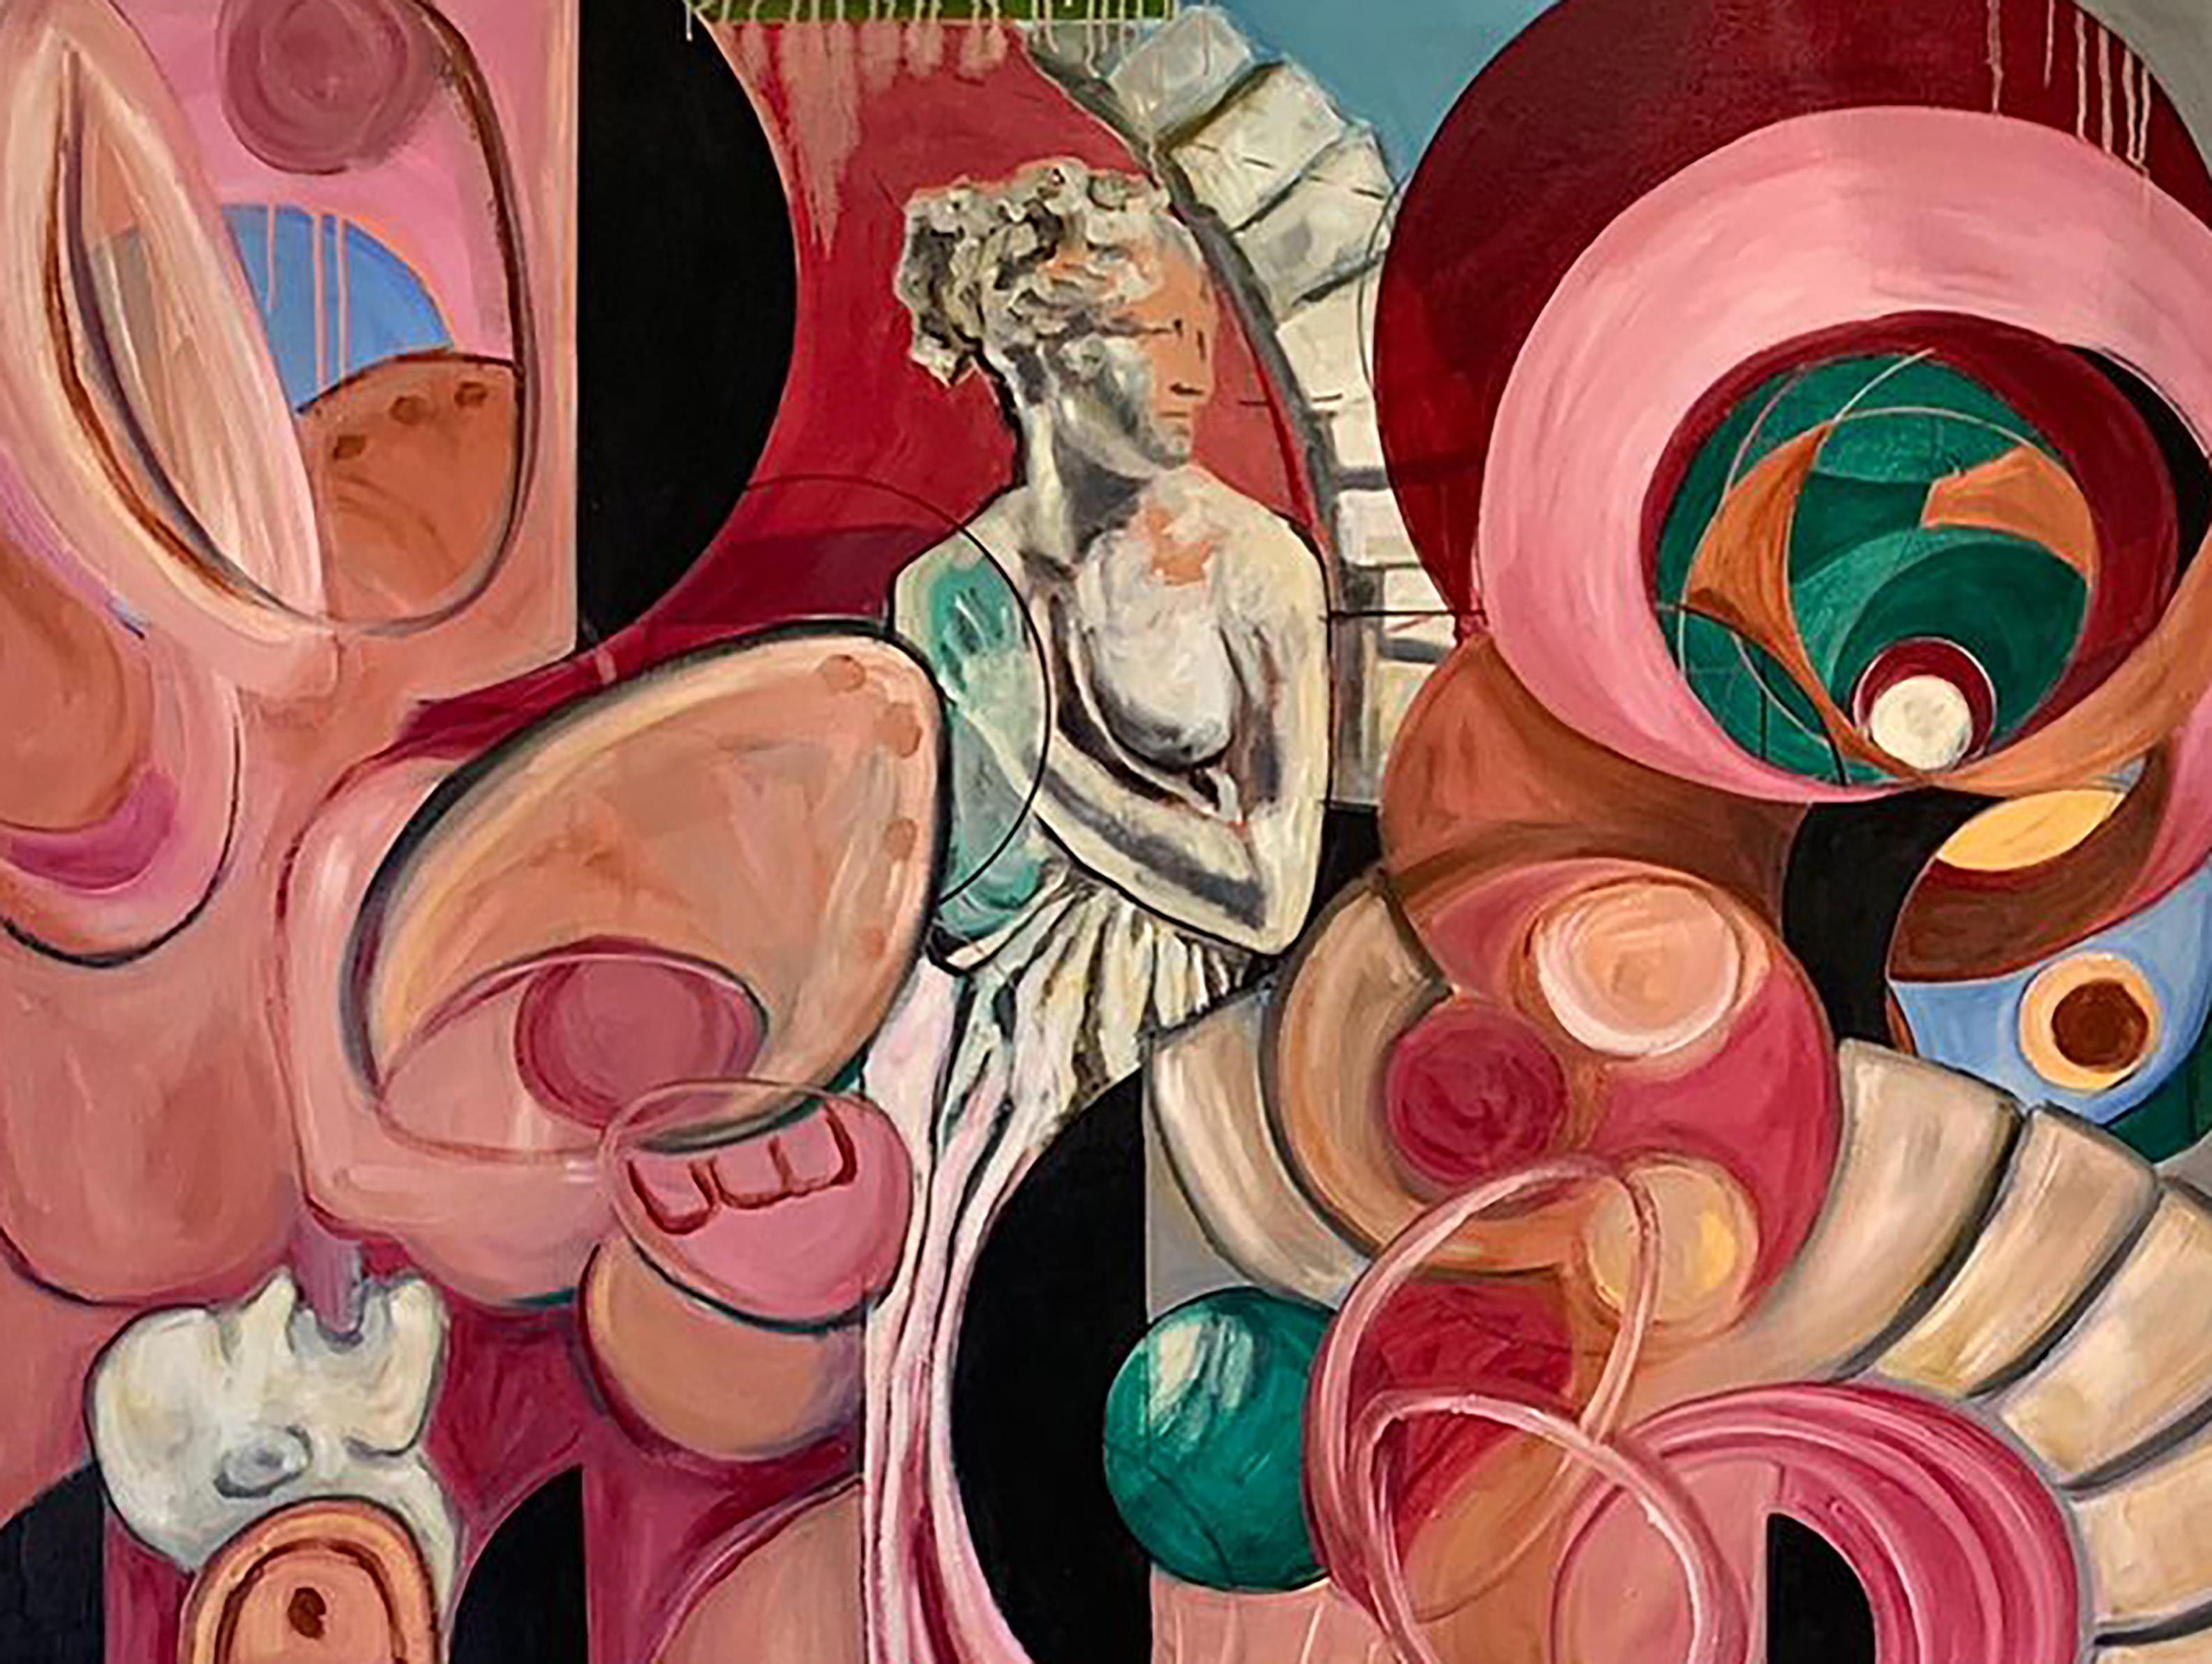 Valerie Campos
Rhapsody in Pink, 2022
Oil on canvas
78 x 106 in